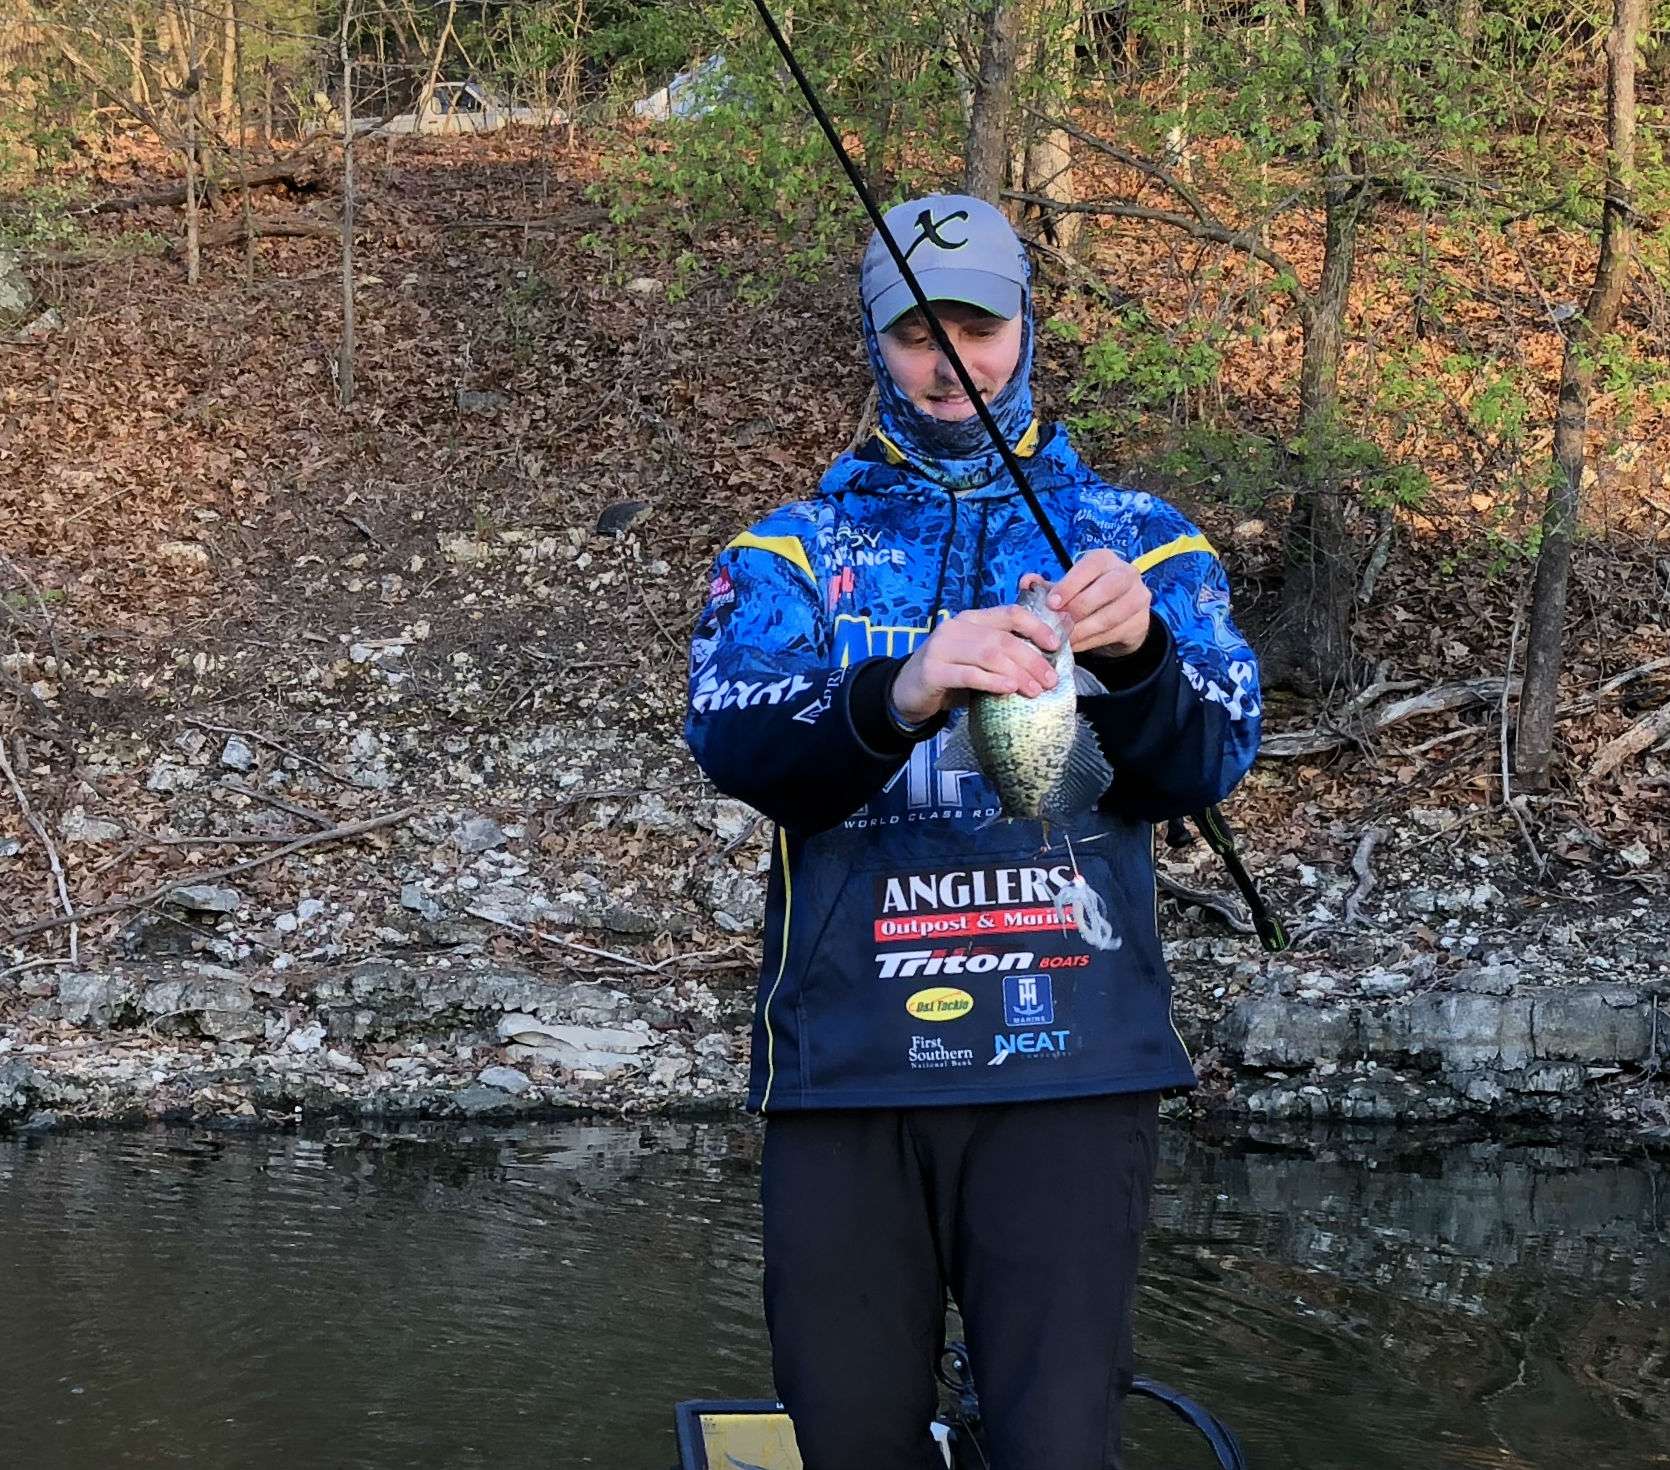 Bass are not the only thing biting Bradley Royâs spinnerbait this morning. Grand Lake is known for its outstanding crappie fishing too. Roy commented, âdinner anyoneâ after landing this one.




